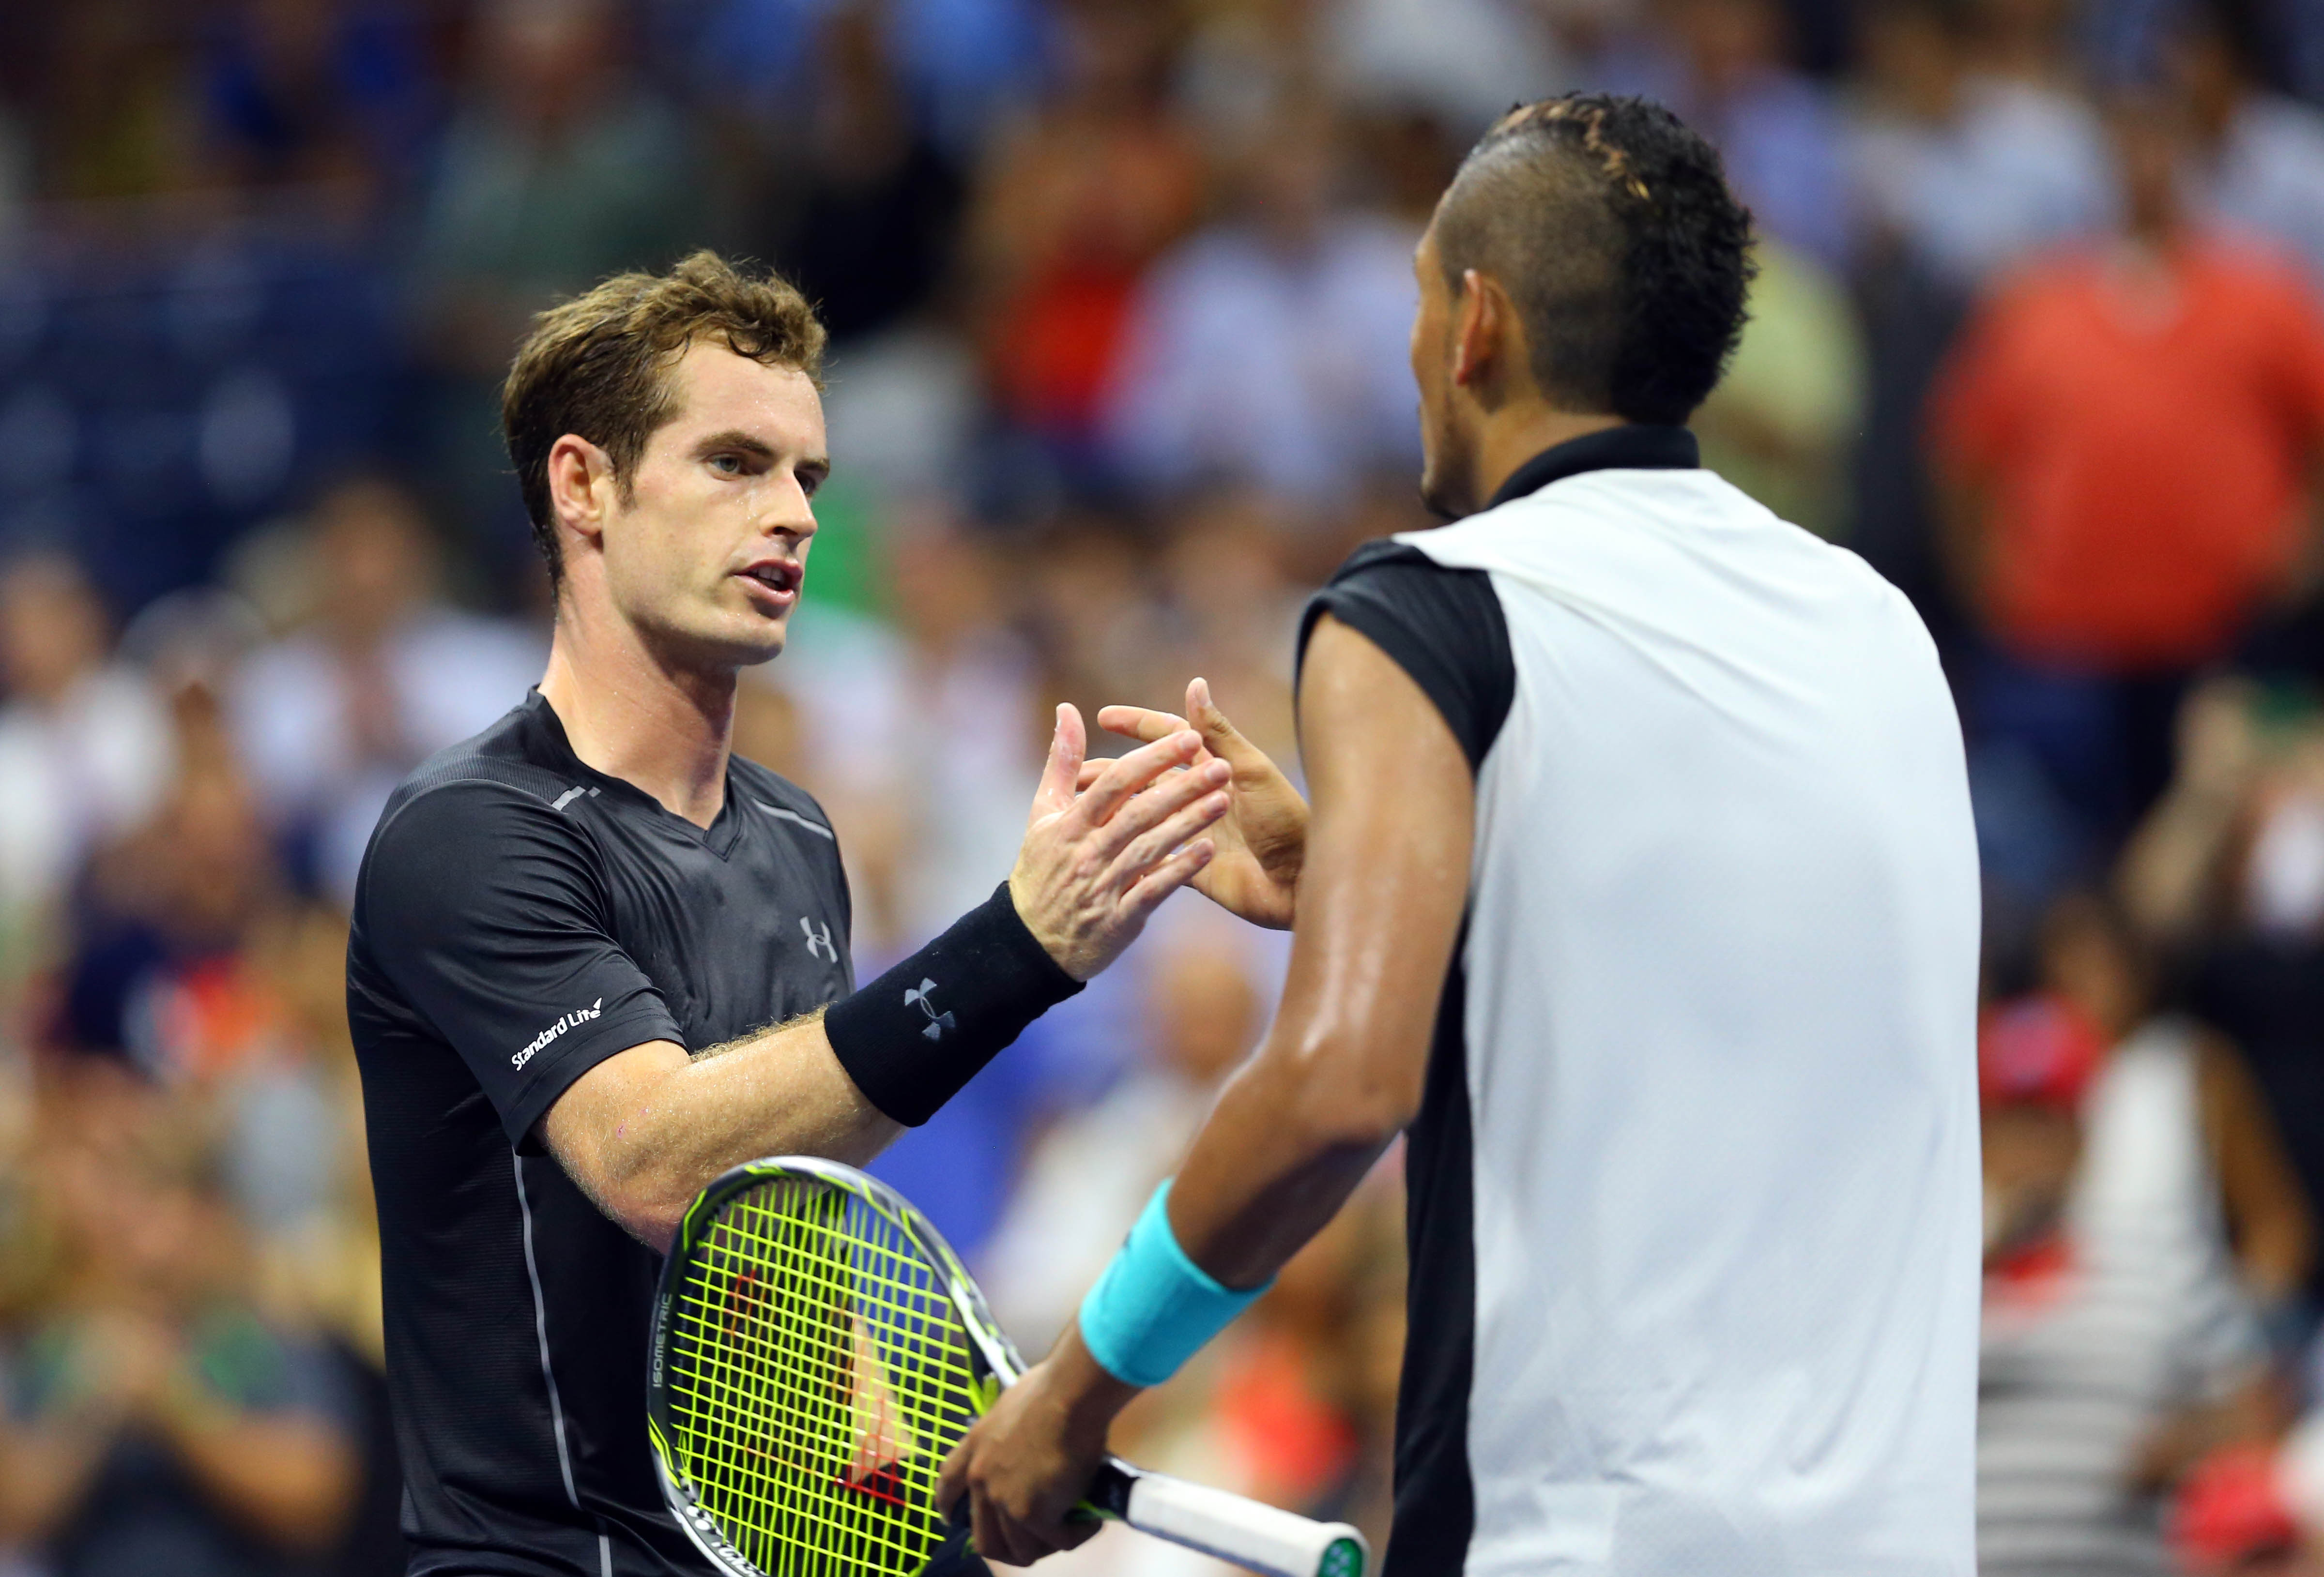 Andy Murray shakes hands with Nick Kyrgios after their first round match. Photo: USA Today